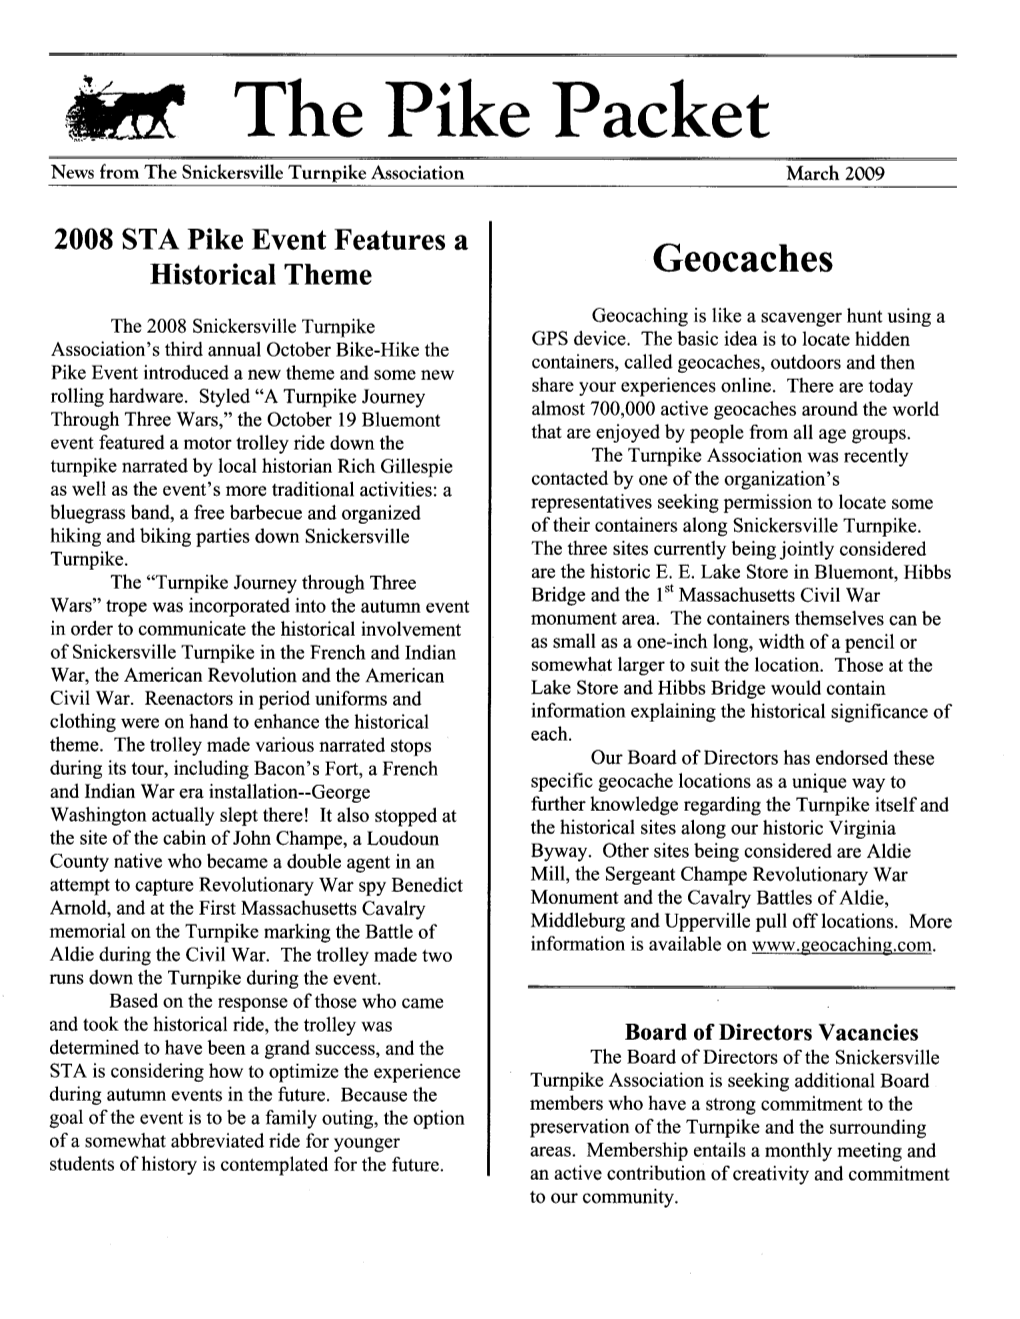 The Pike Packet News from the Snickersville Turnpike Association